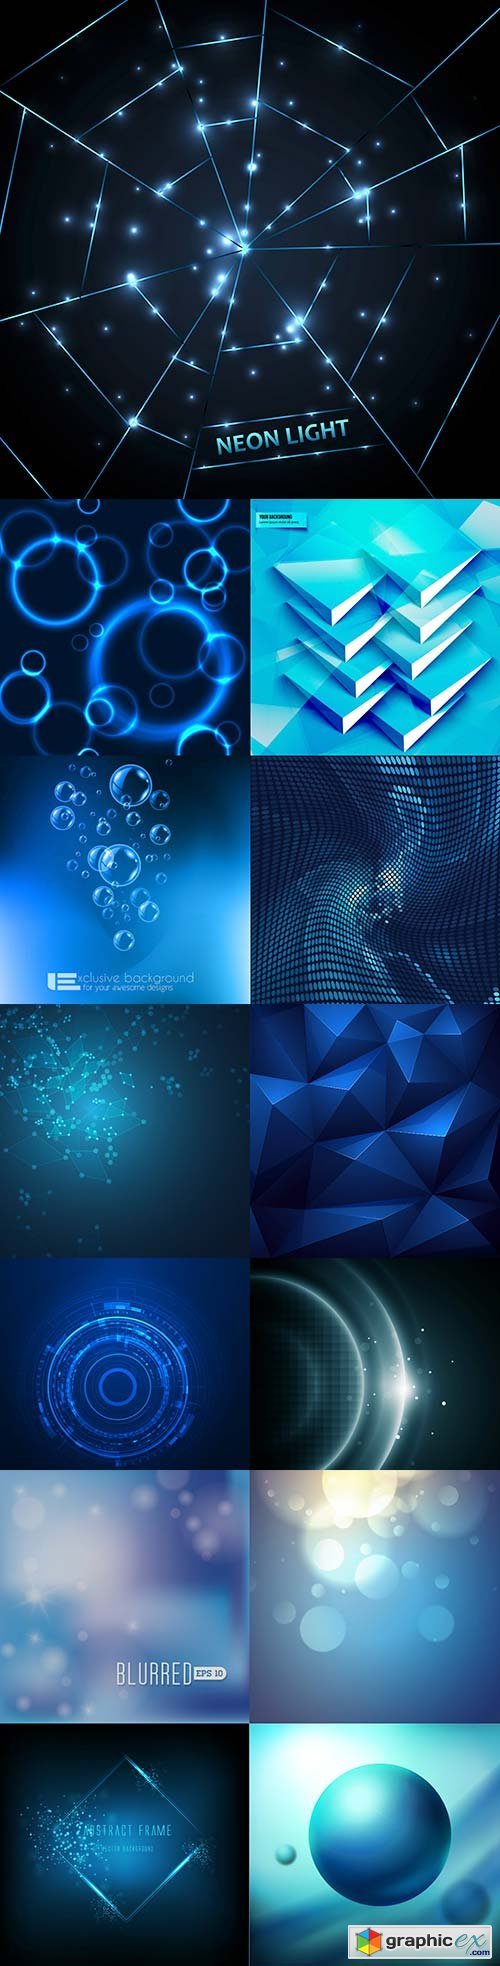 Blue abstract vector backgrounds